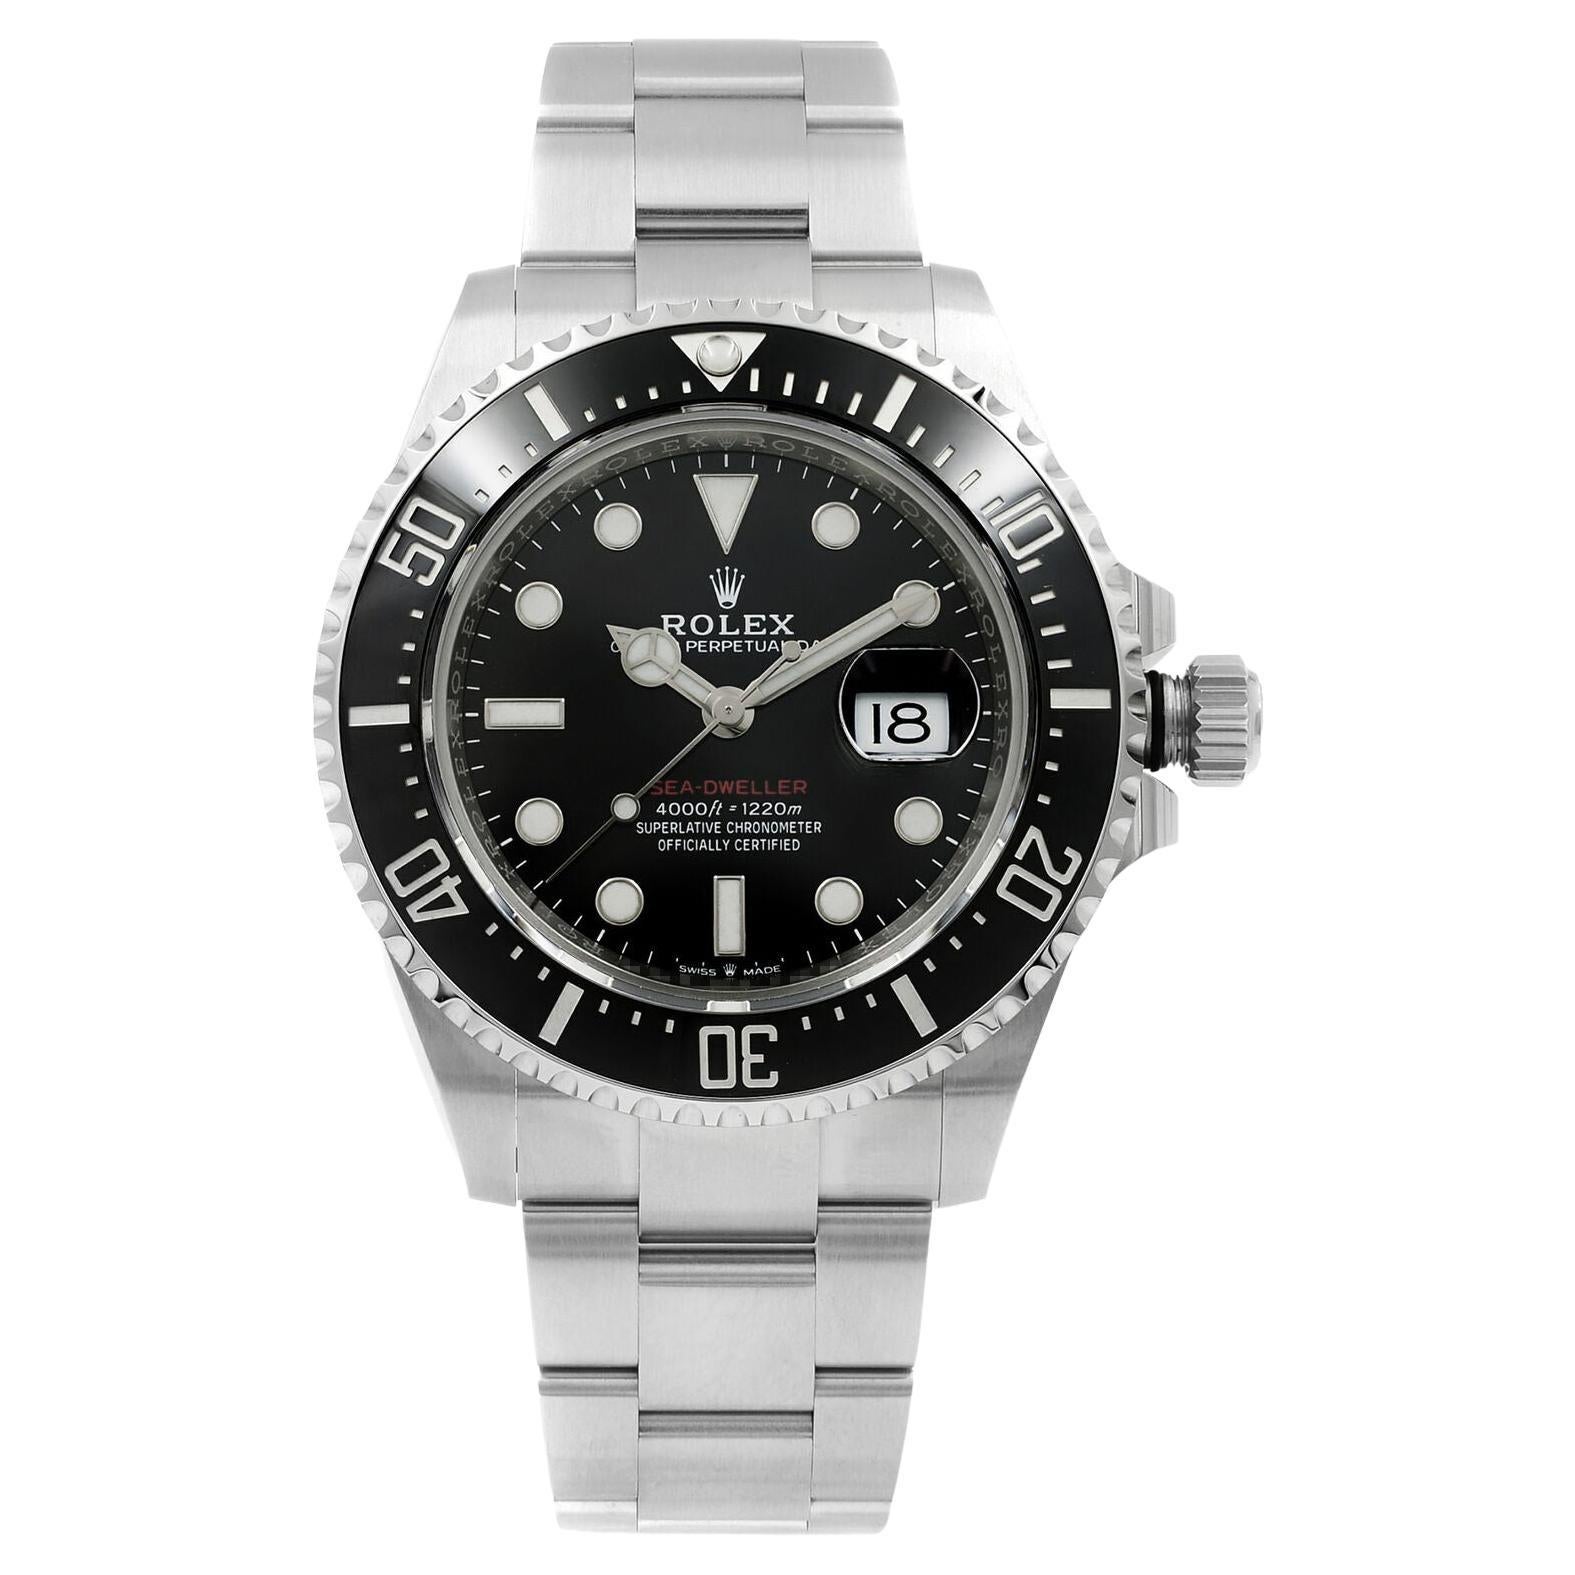 Rolex Sea Dweller Red Line Steel Ceramic Black Dial Automatic Watch 126600 For Sale